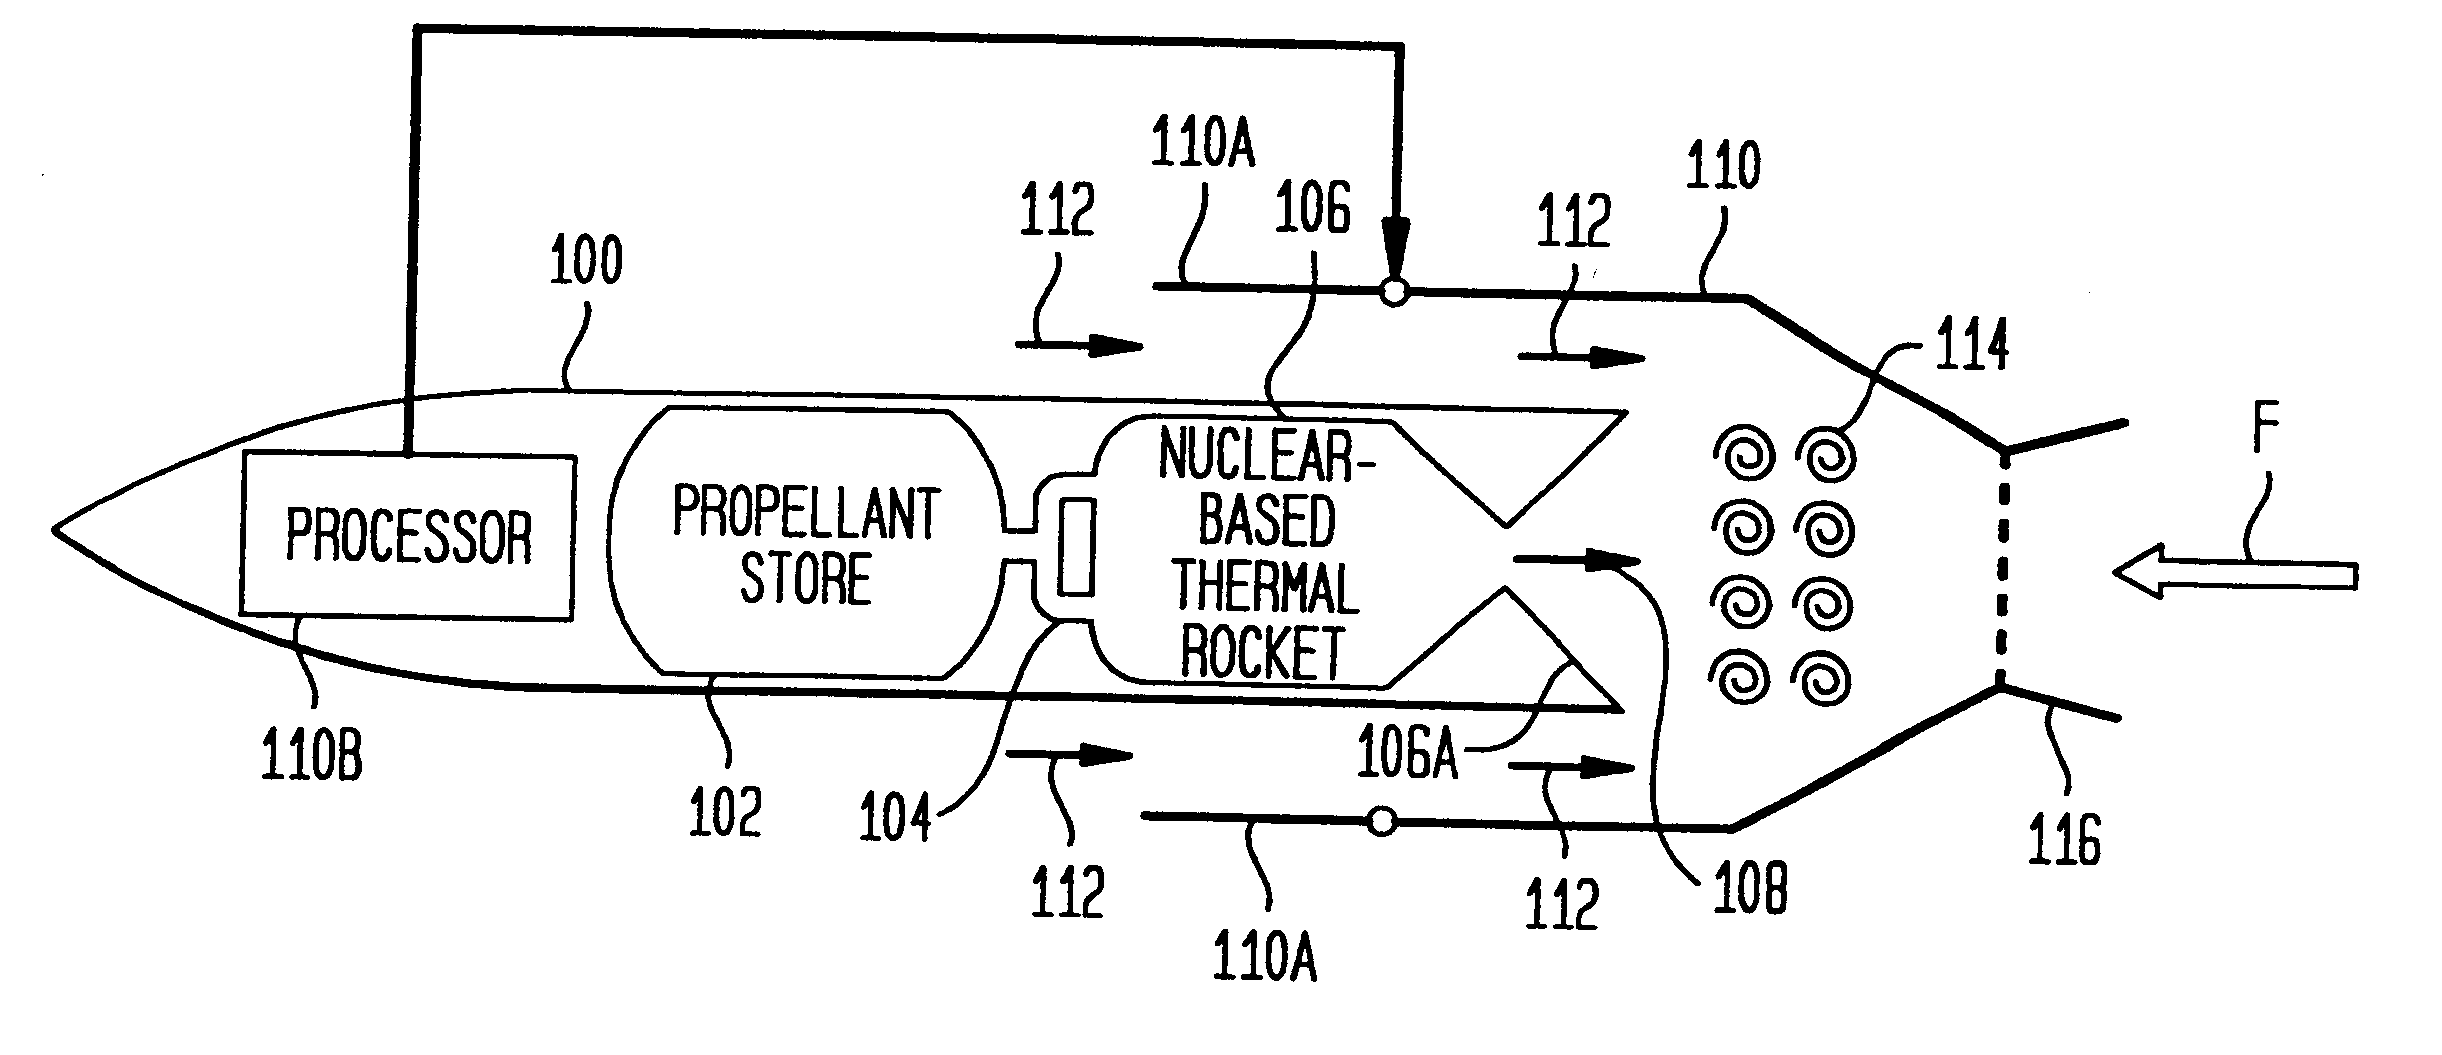 Atomic-based combined cycle propulsion system and method